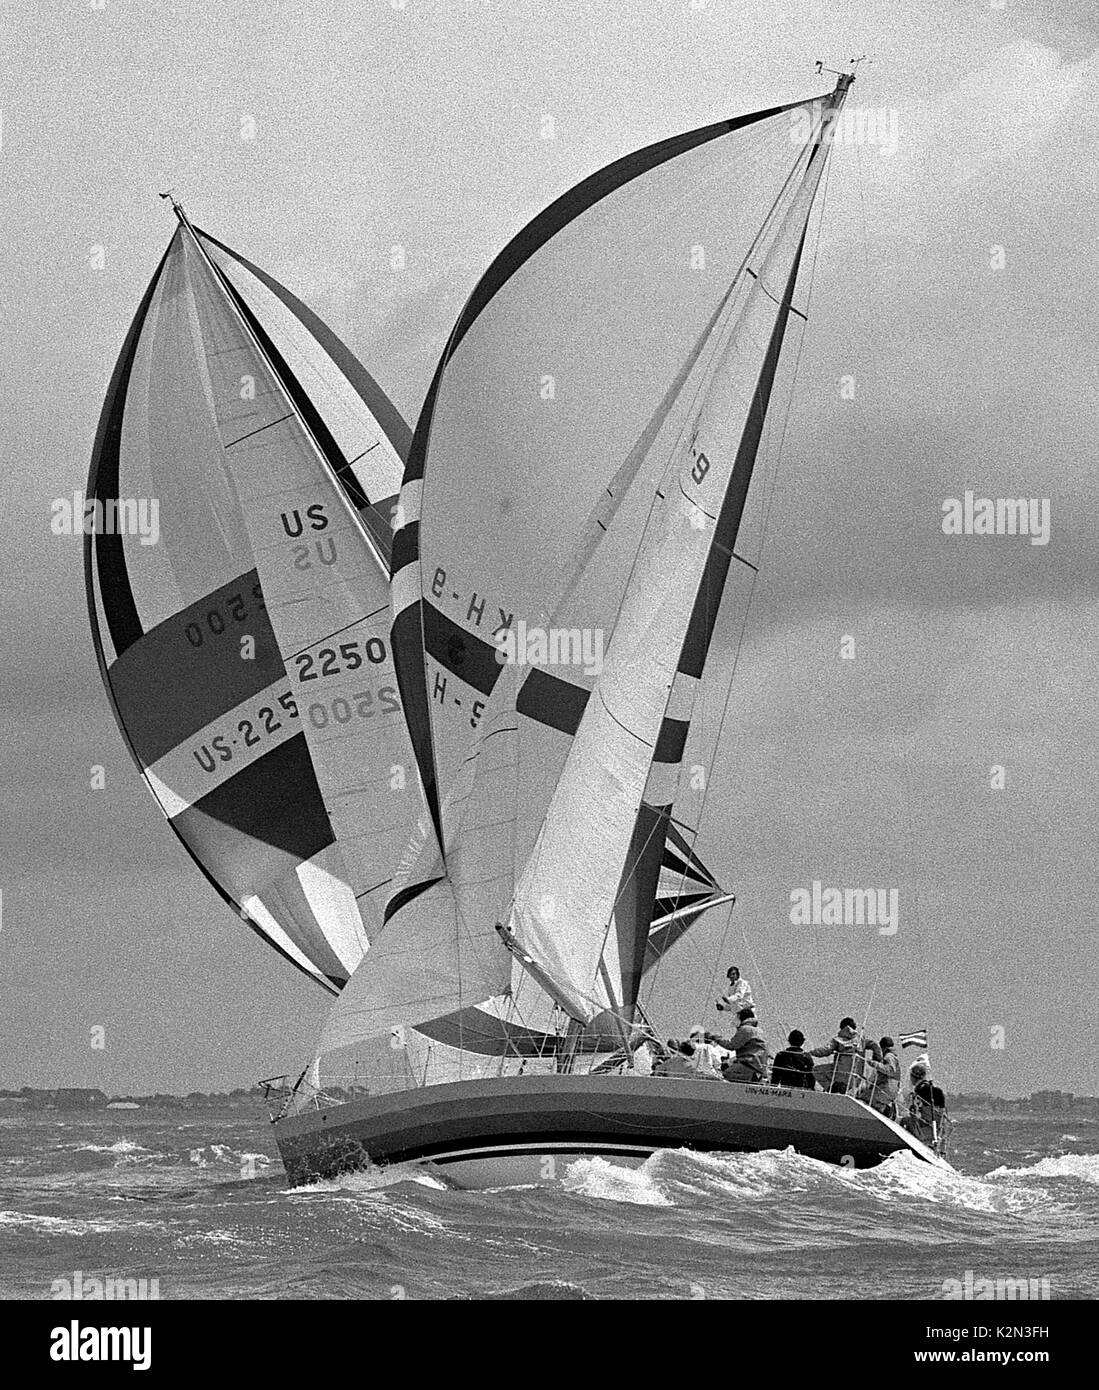 AJAXNETPHOTO.1979. SOLENT, ENGLAND. - ADMIRAL'S CUP SOLENT INSHORE RACE - UIN-NA-MARA (HK) AND WILLIWAW (USA) - WALTZING THE SOLENT. PHOTO:JONATHAN EASTLAND/AJAX REF:79 2011 Stock Photo